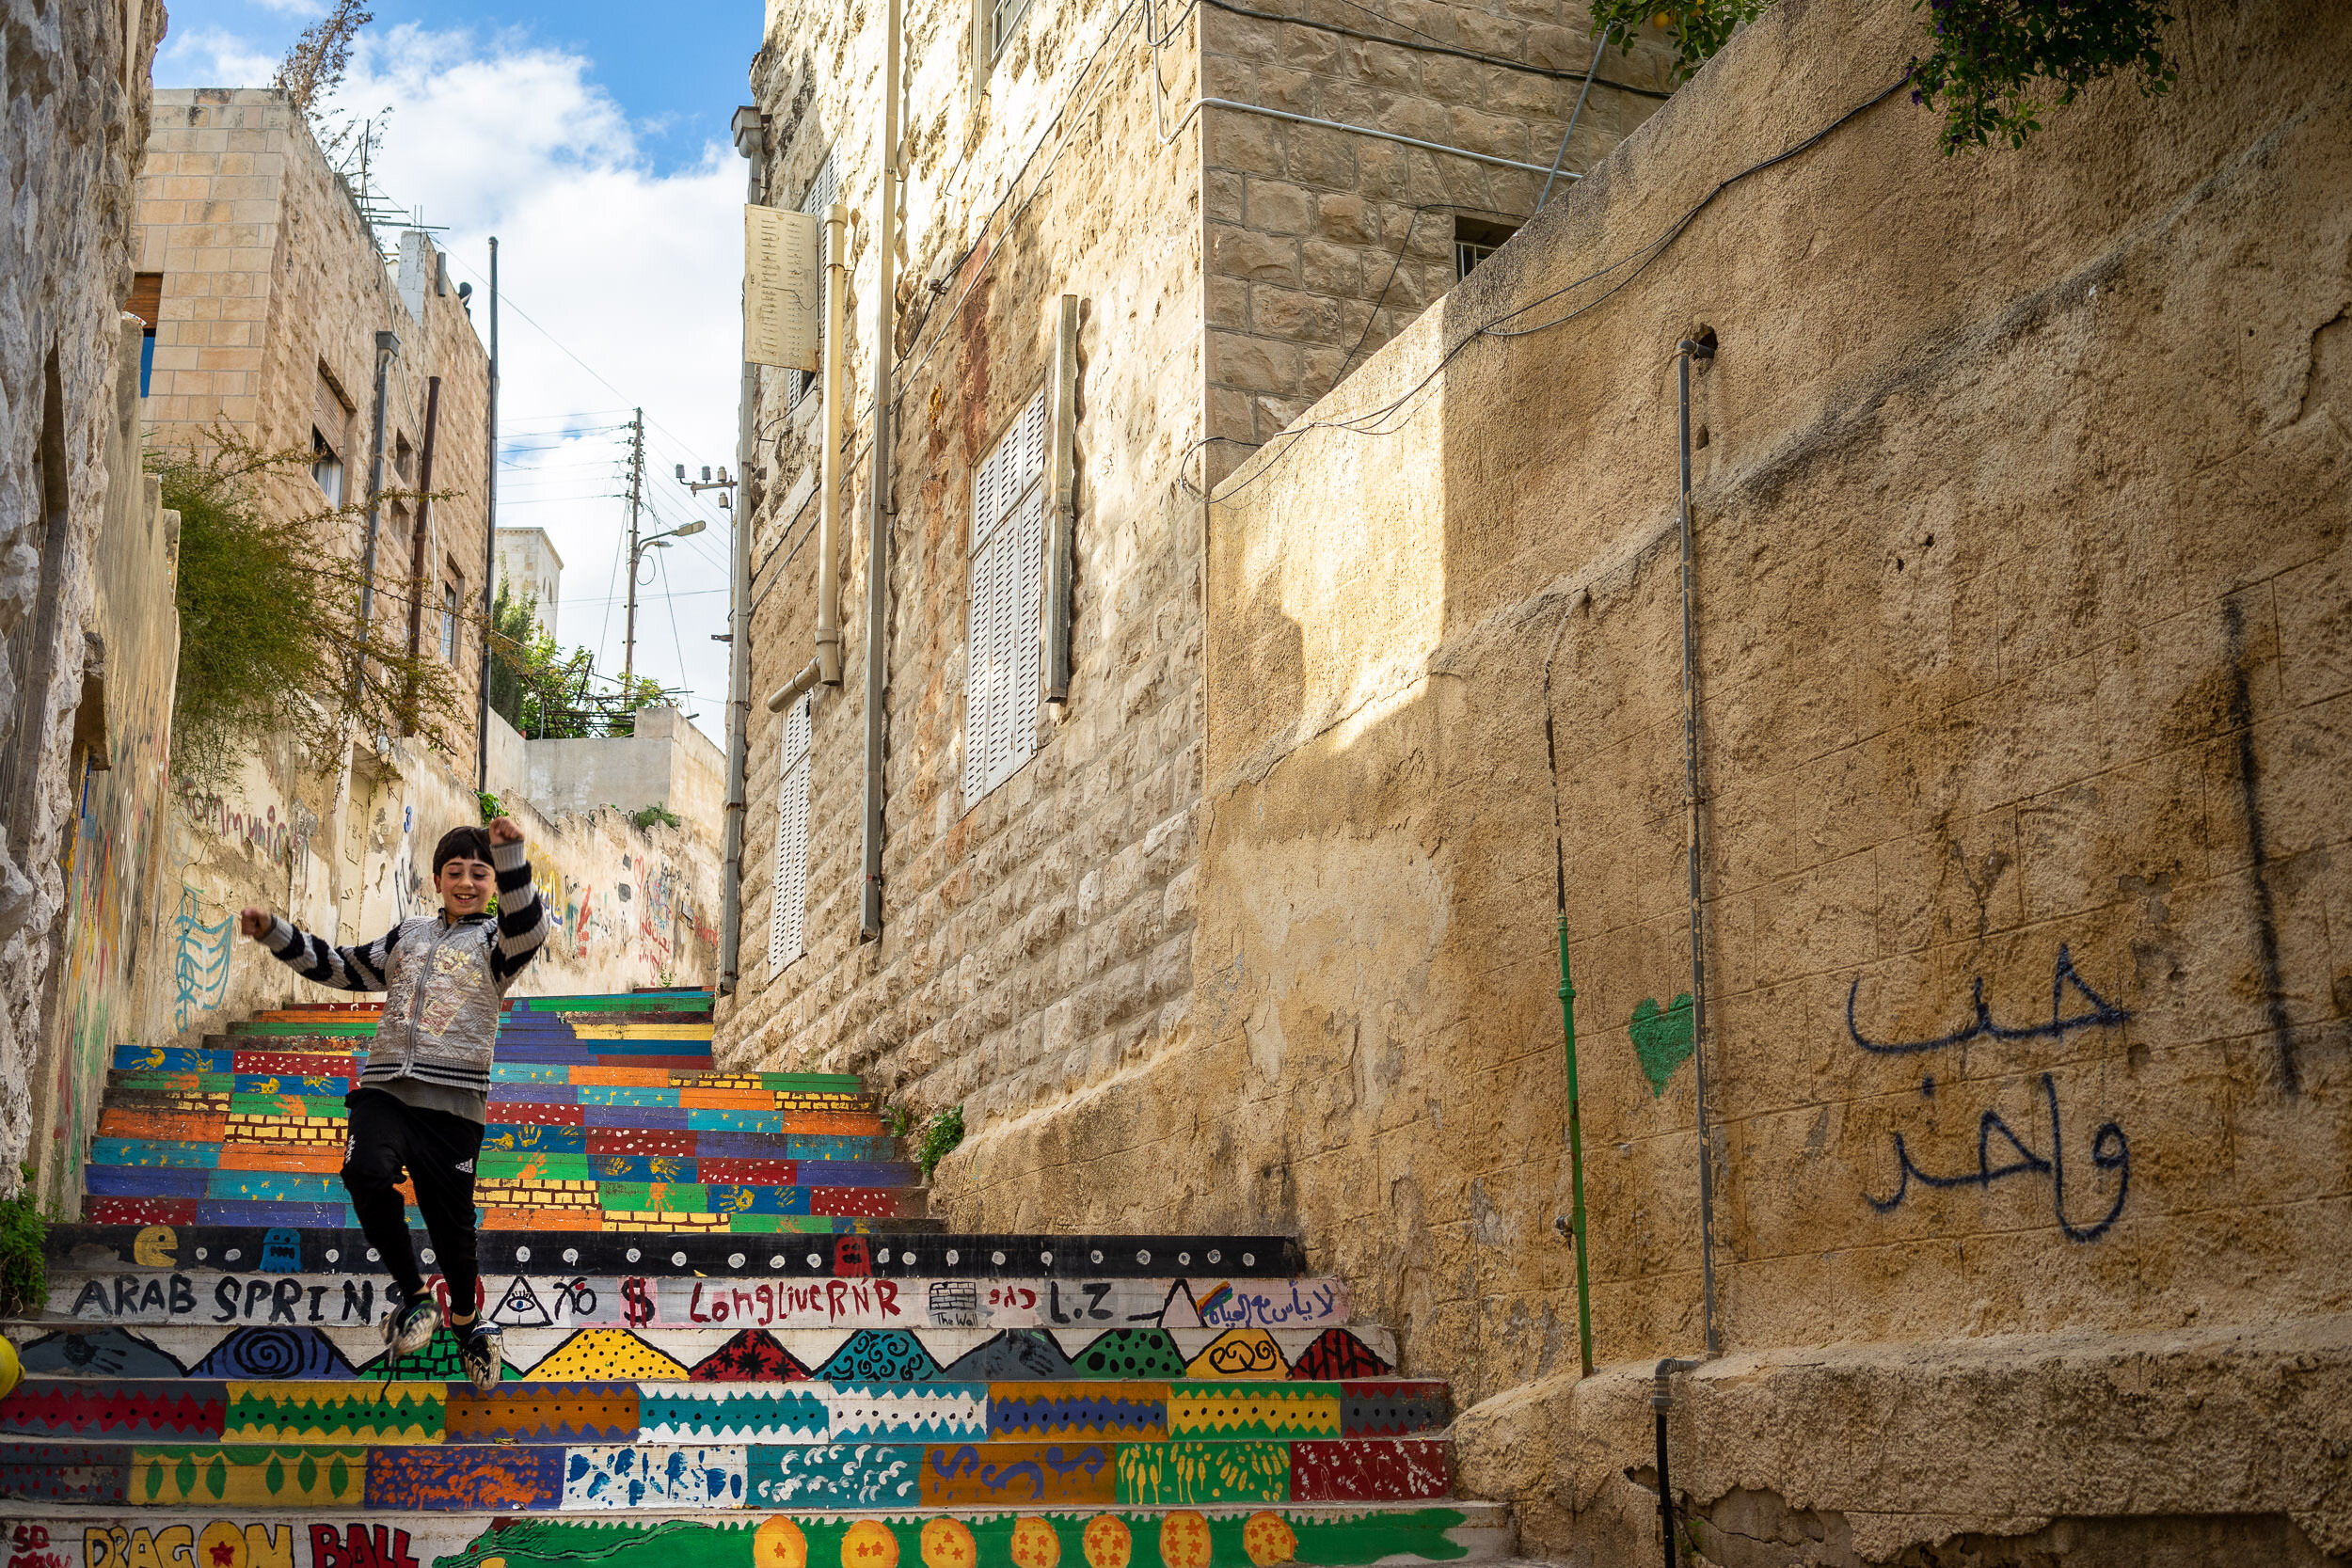 This young guy is having a brilliant time running down colorful steps in Amman